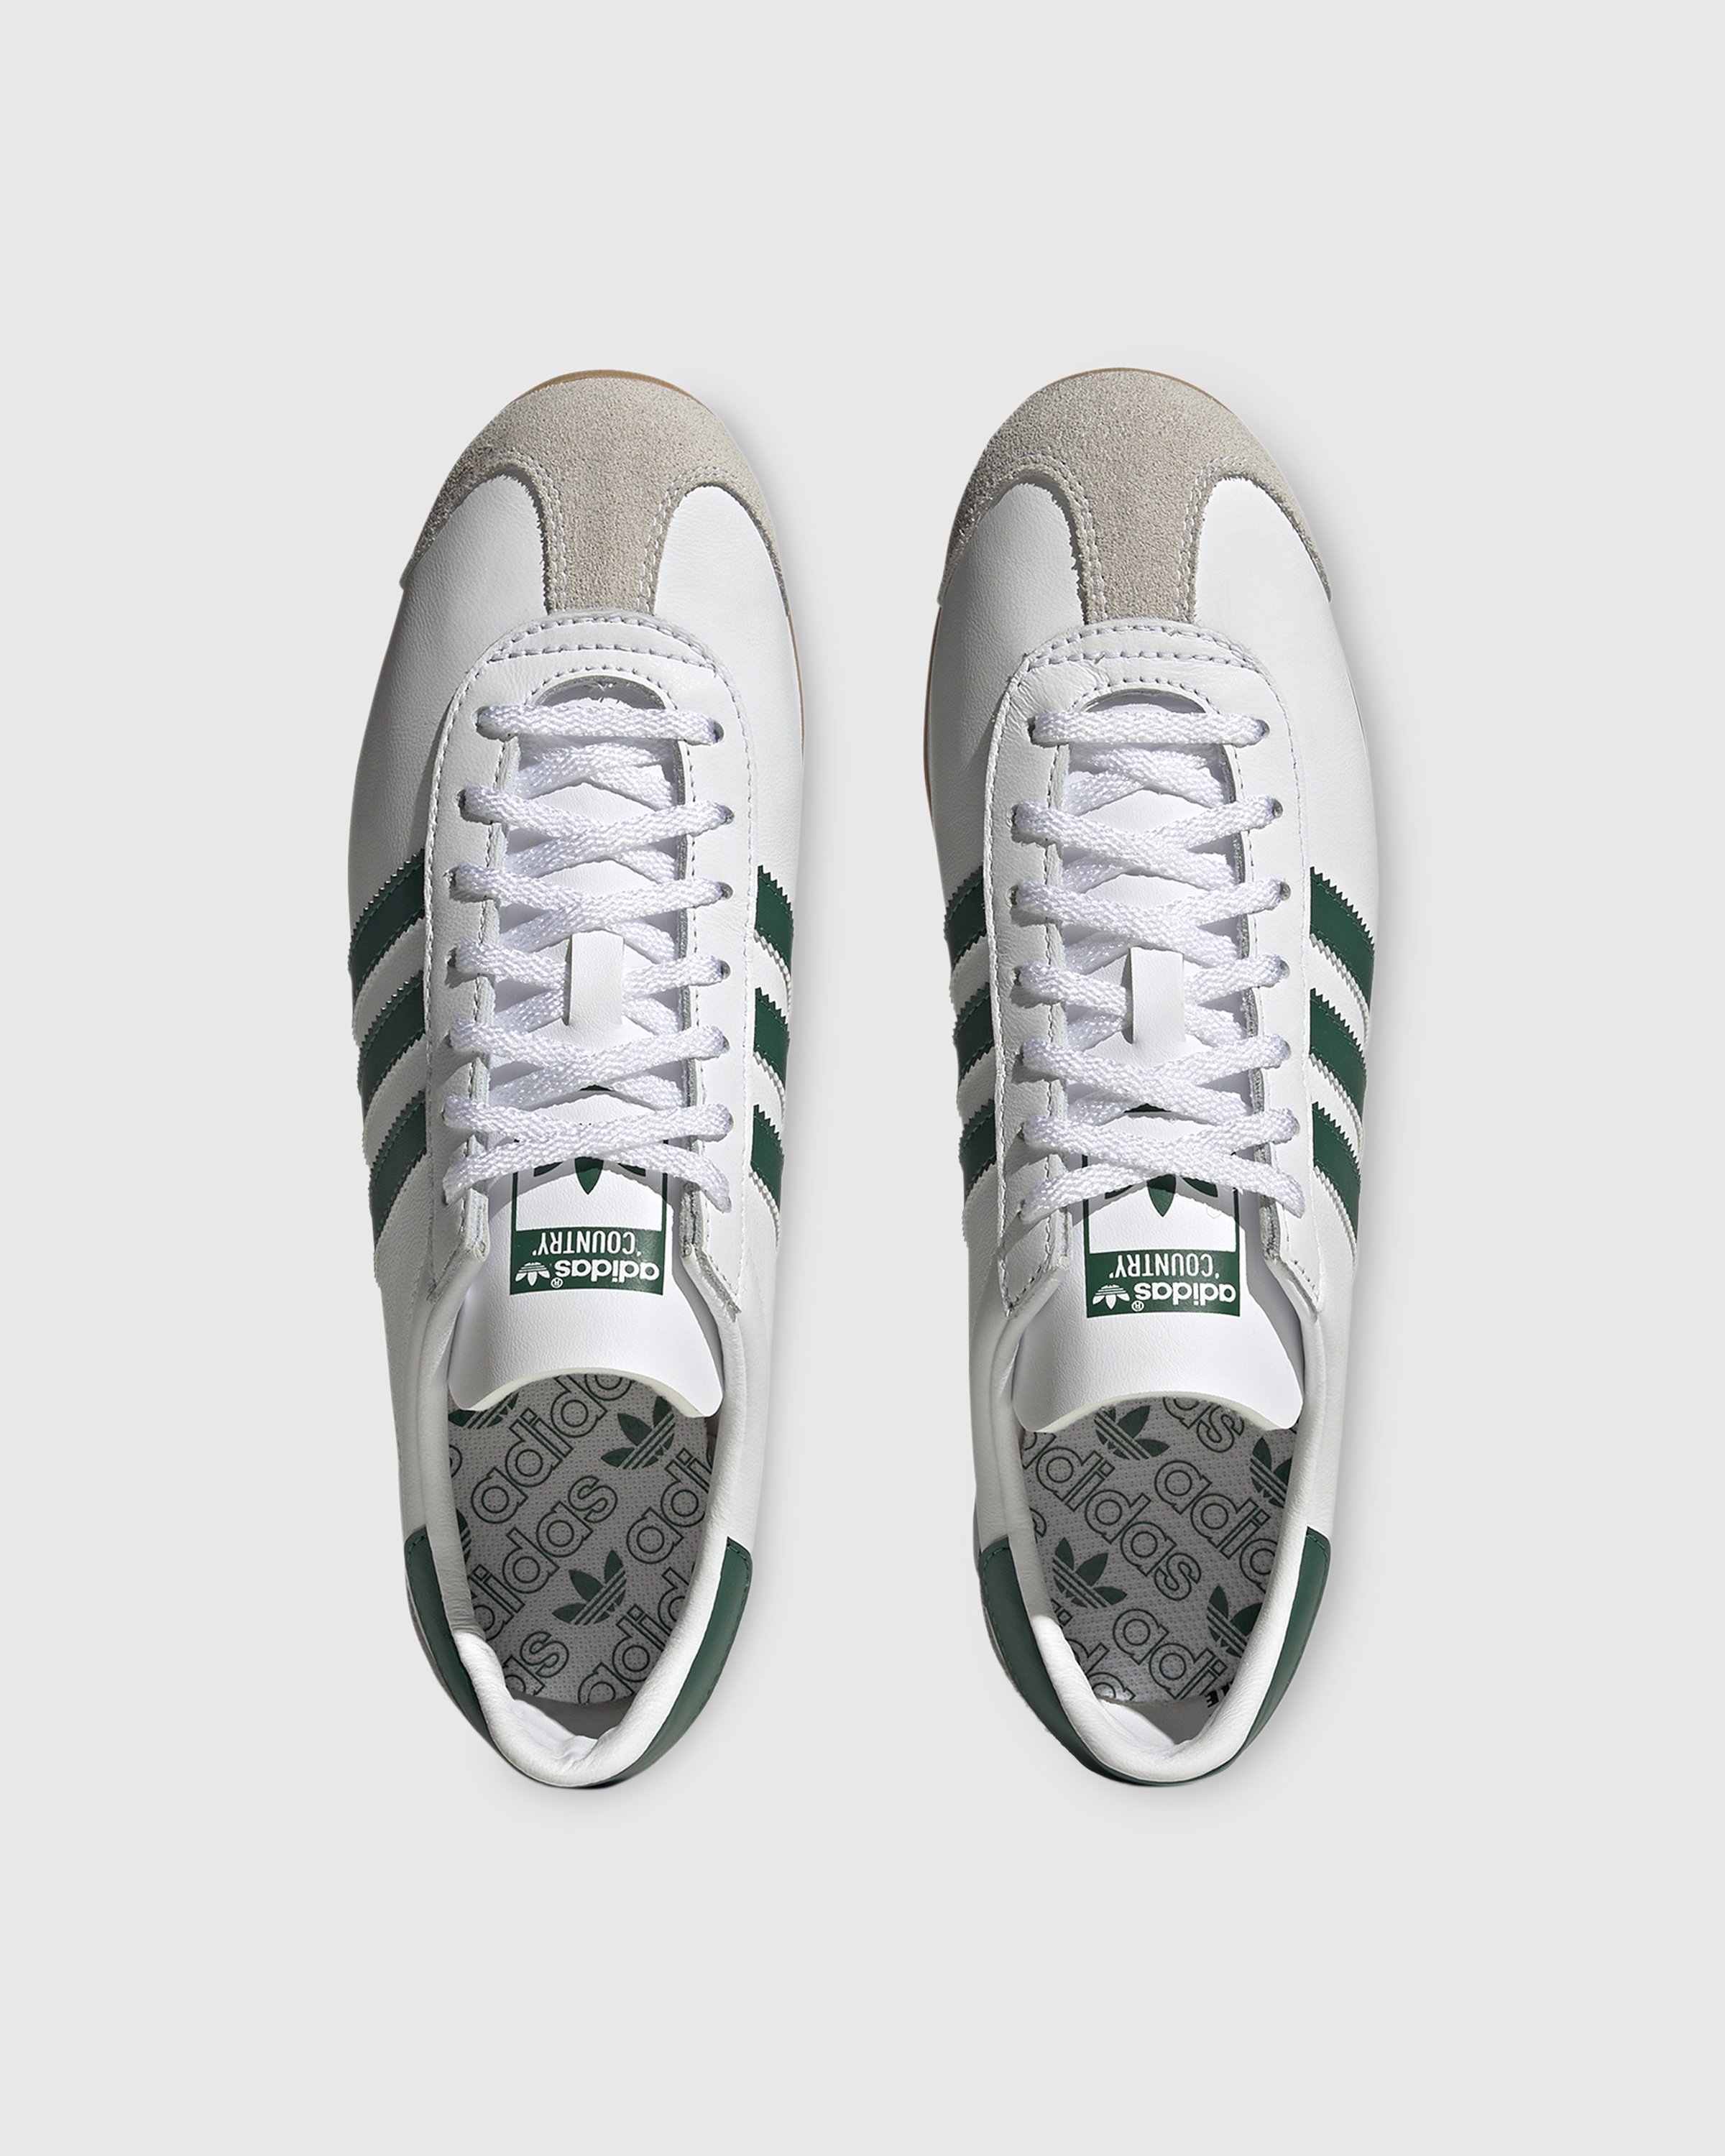 Adidas - Country OG Cloud White/Collegiate Green - Footwear - White - Image 3